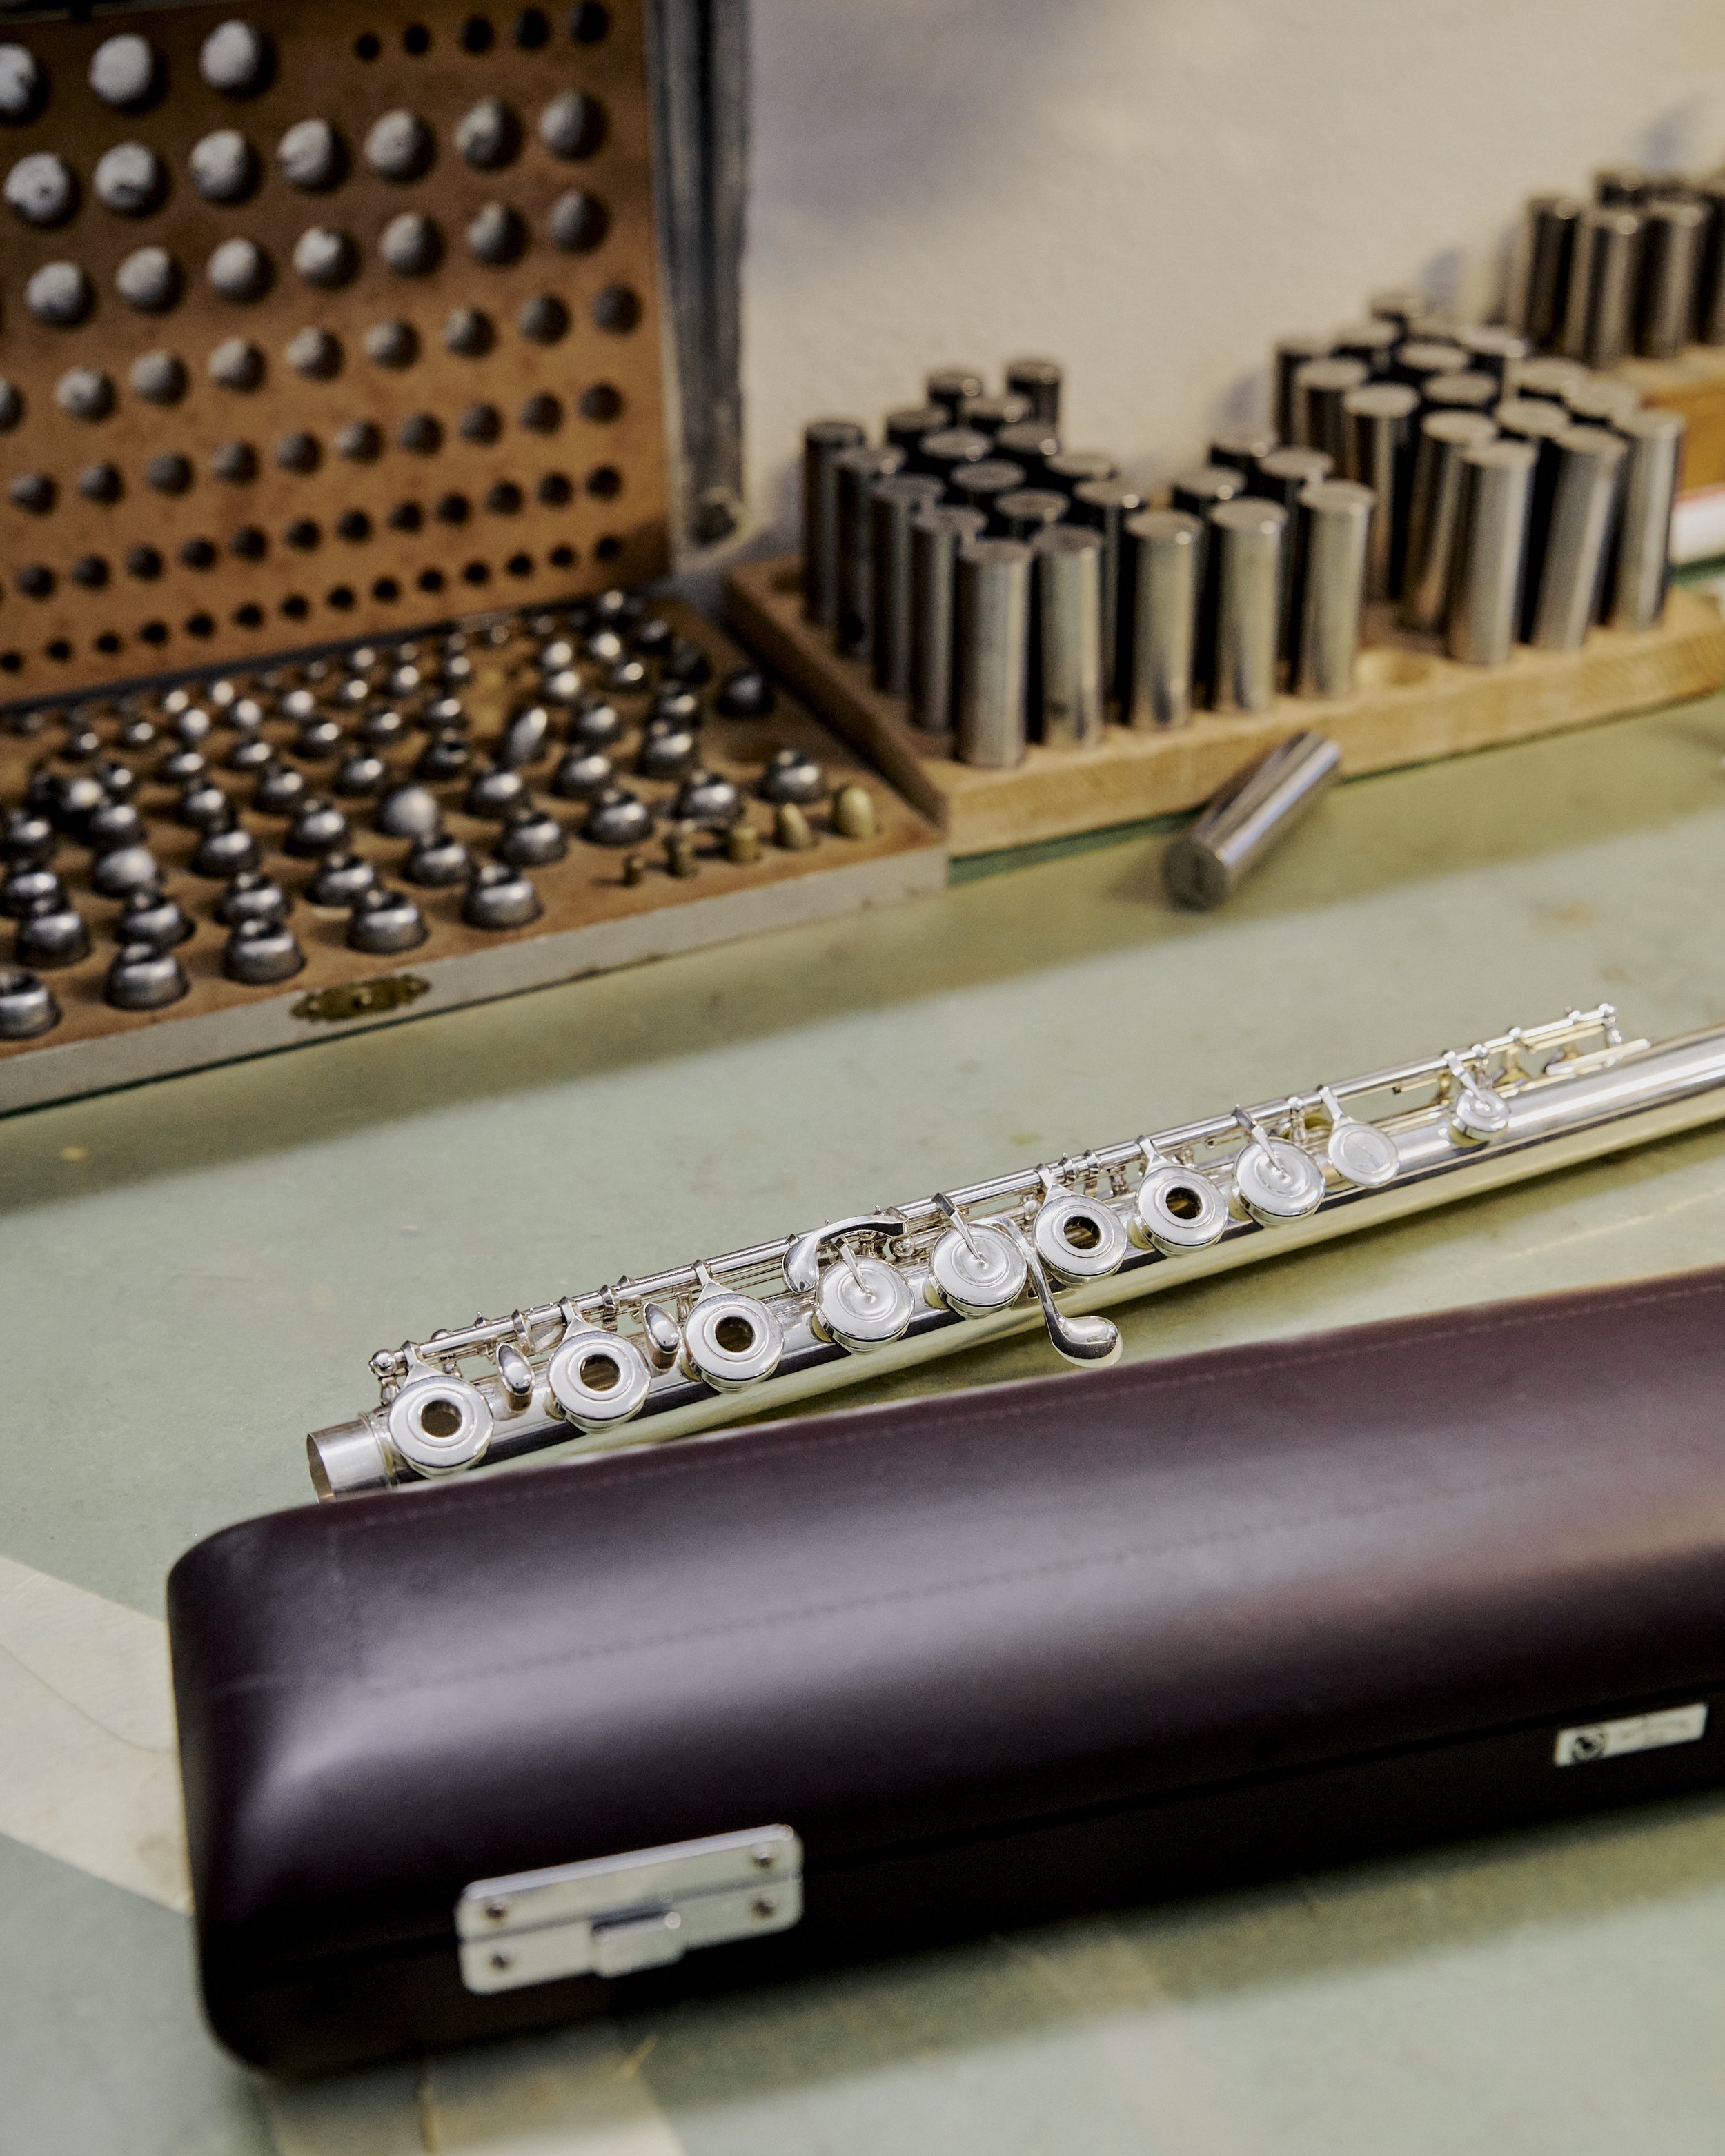 A flute with its box in a flute repair workshop